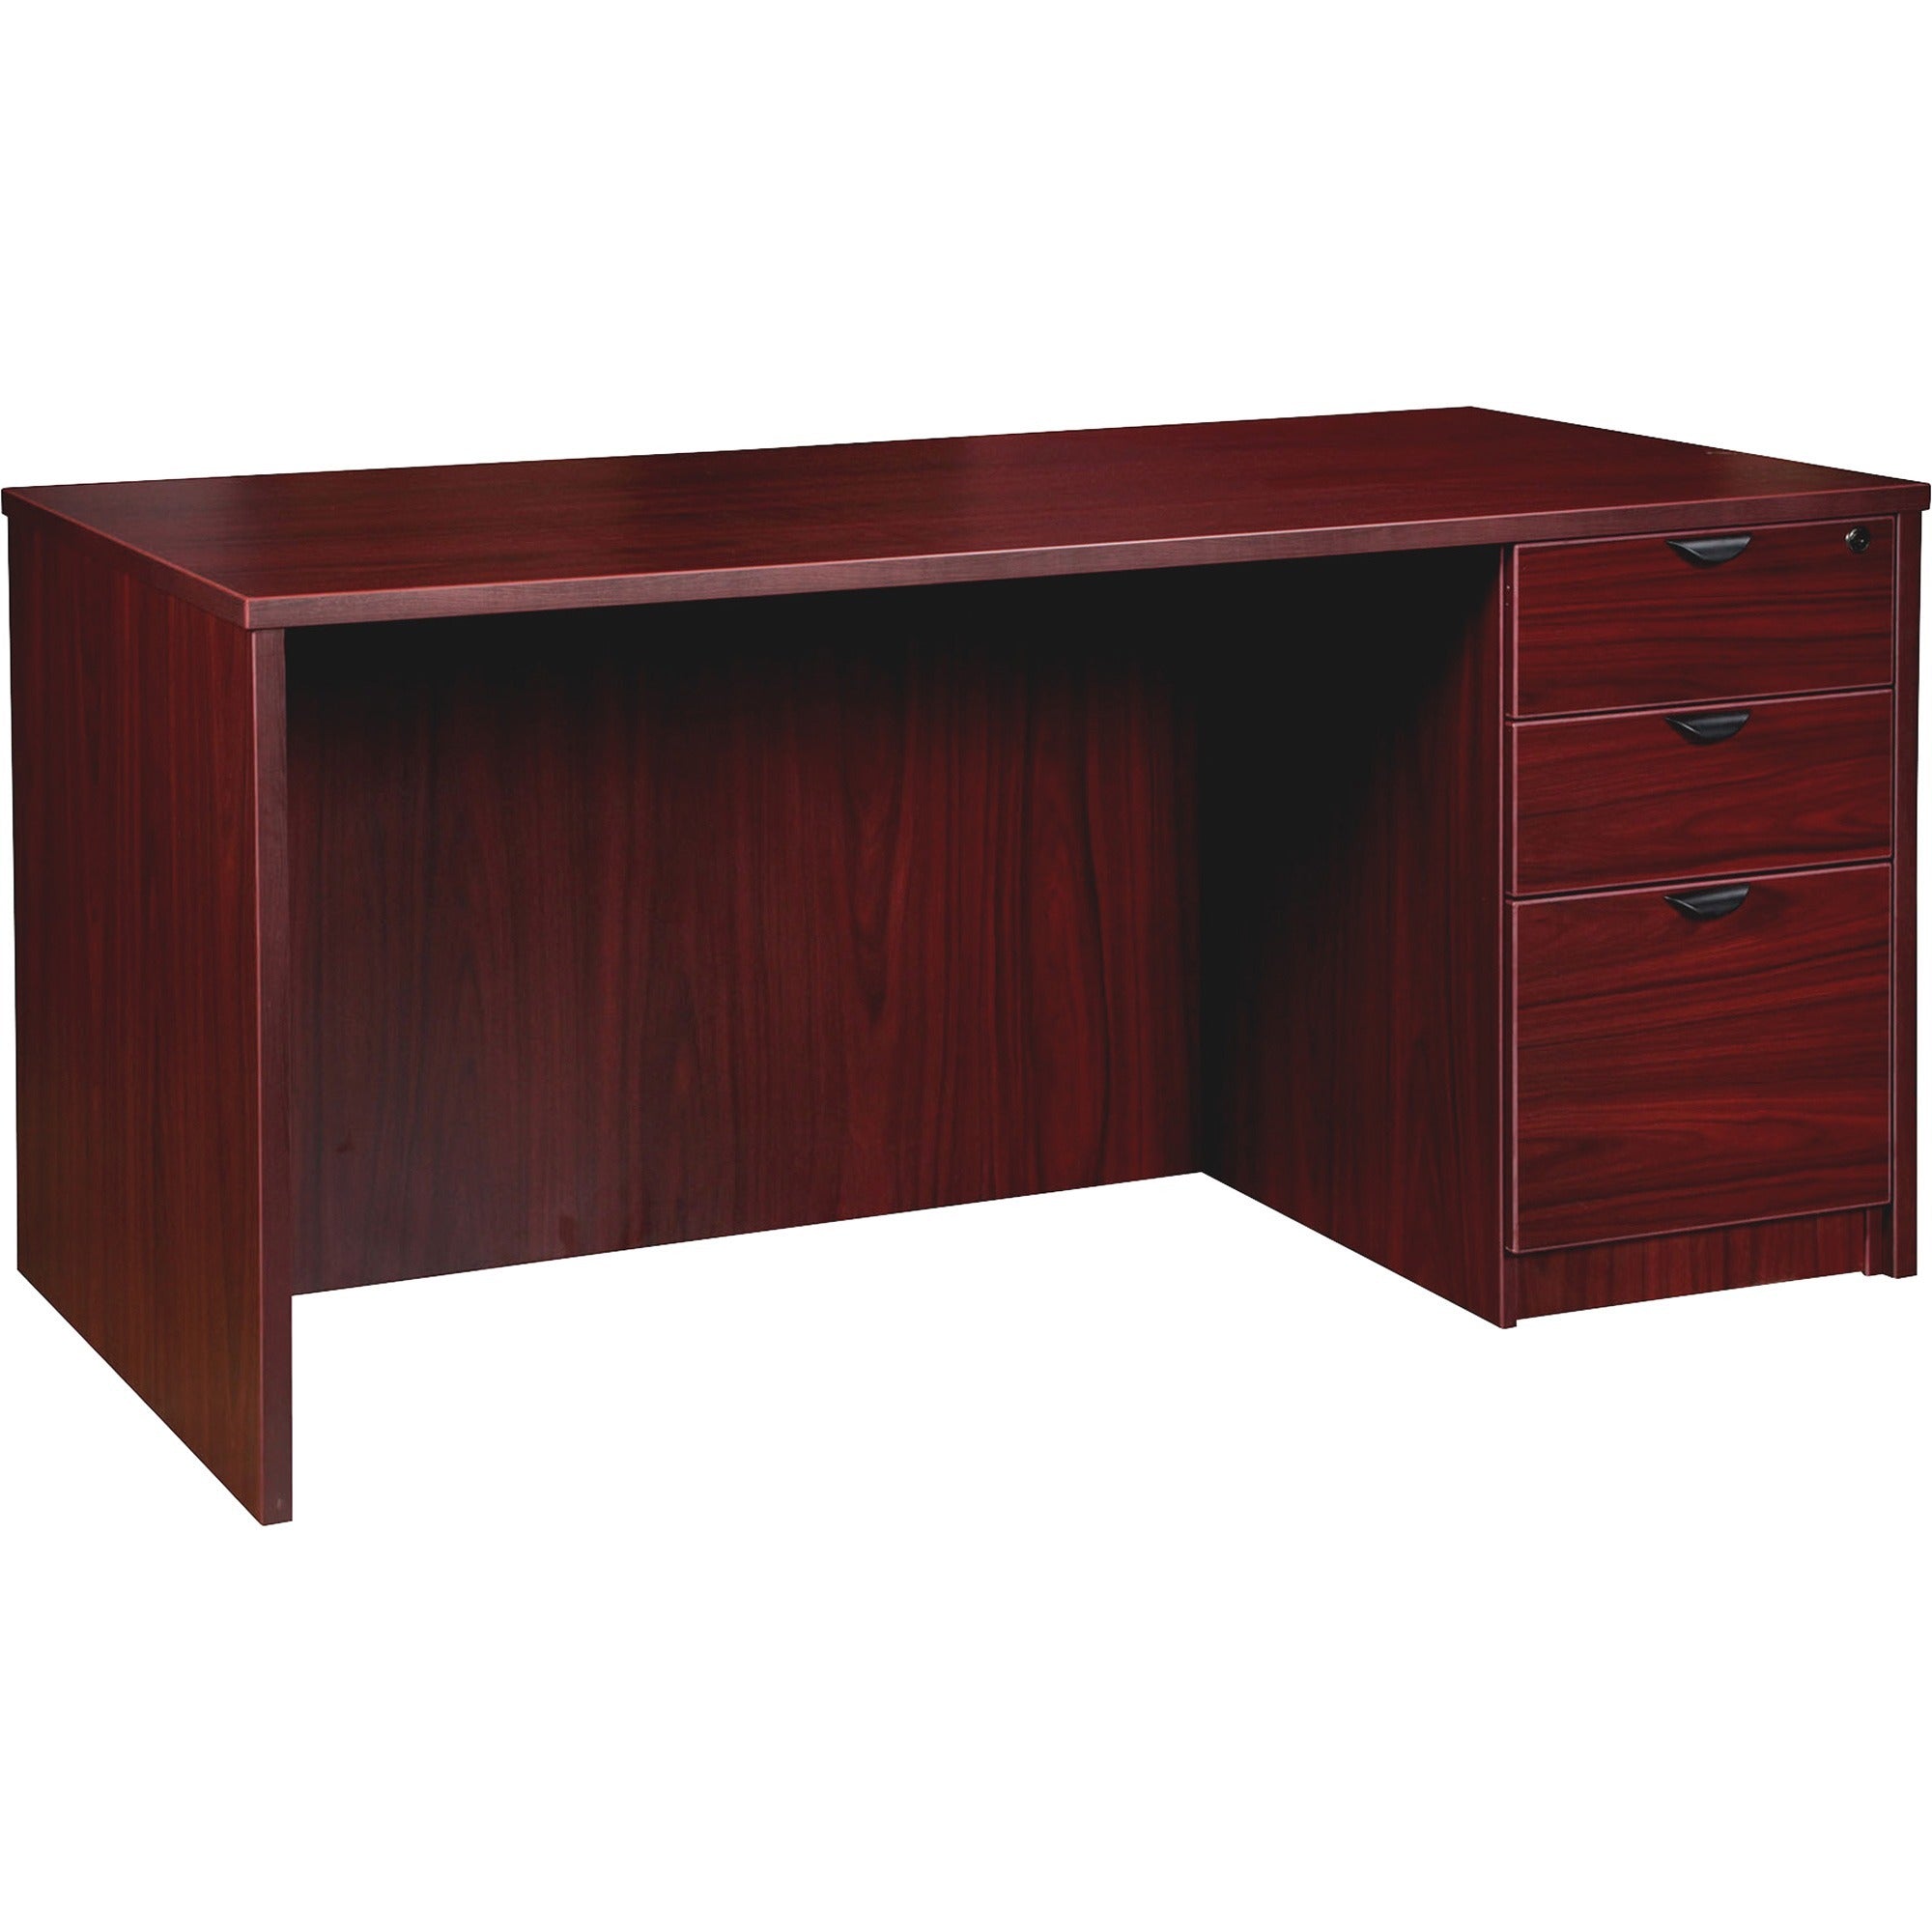 lorell-prominence-20-right-pedestal-desk-1-top-60-x-3029-3-x-file-box-drawers-single-pedestal-on-right-side-band-edge-material-particleboard-finish-mahogany-laminate-thermofused-melamine-tfm_llrpd3060rspmy - 1